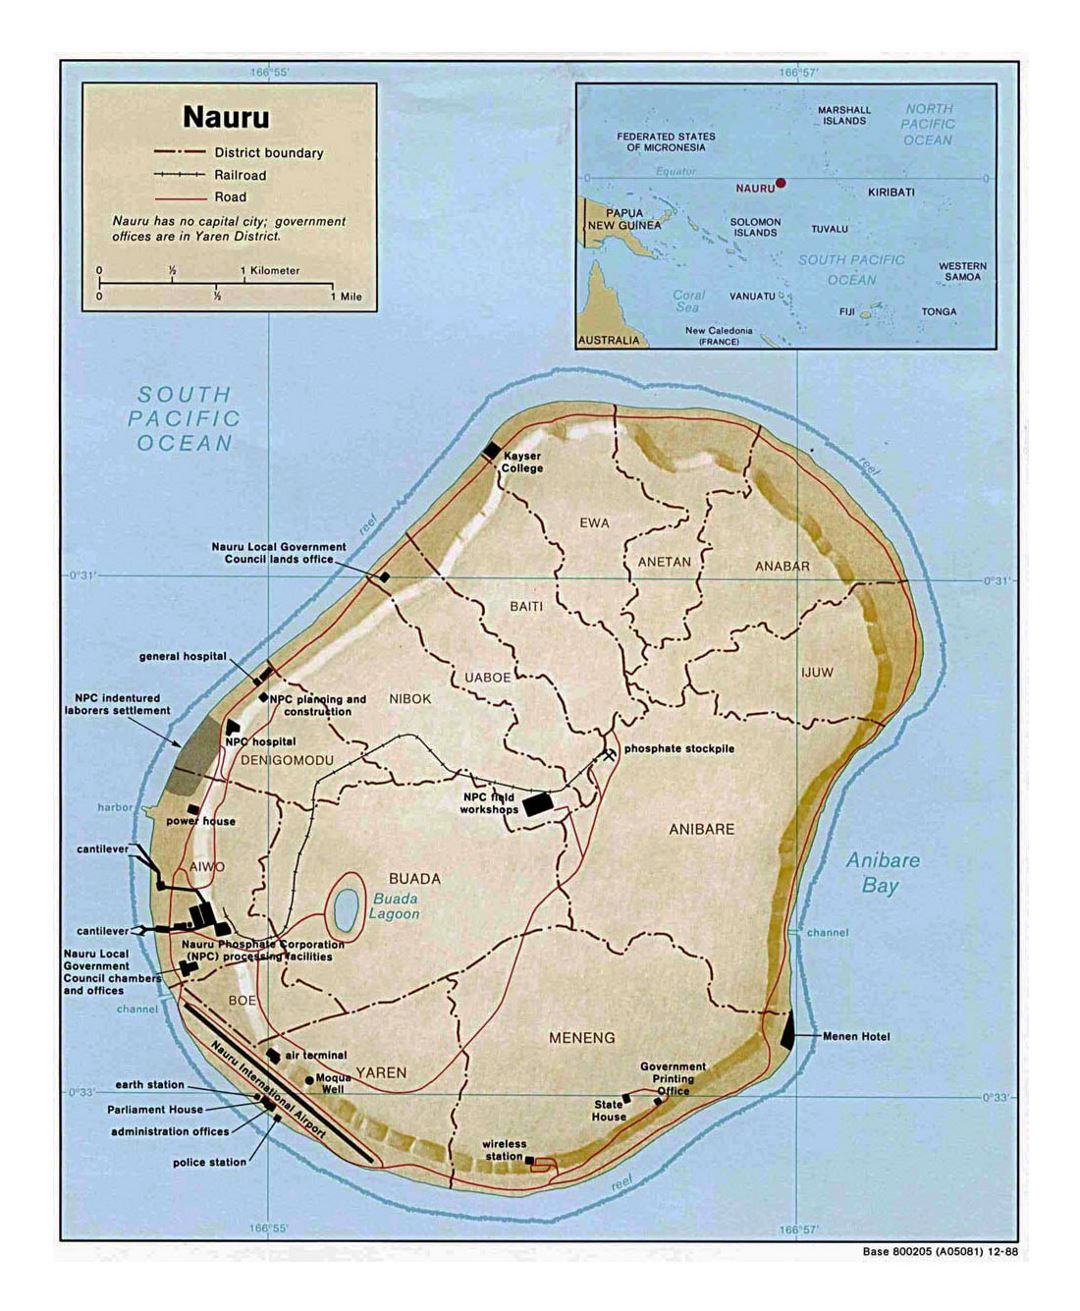 Detailed political and administrative map of Nauru with relief, roads, railroads and other facilities - 1988